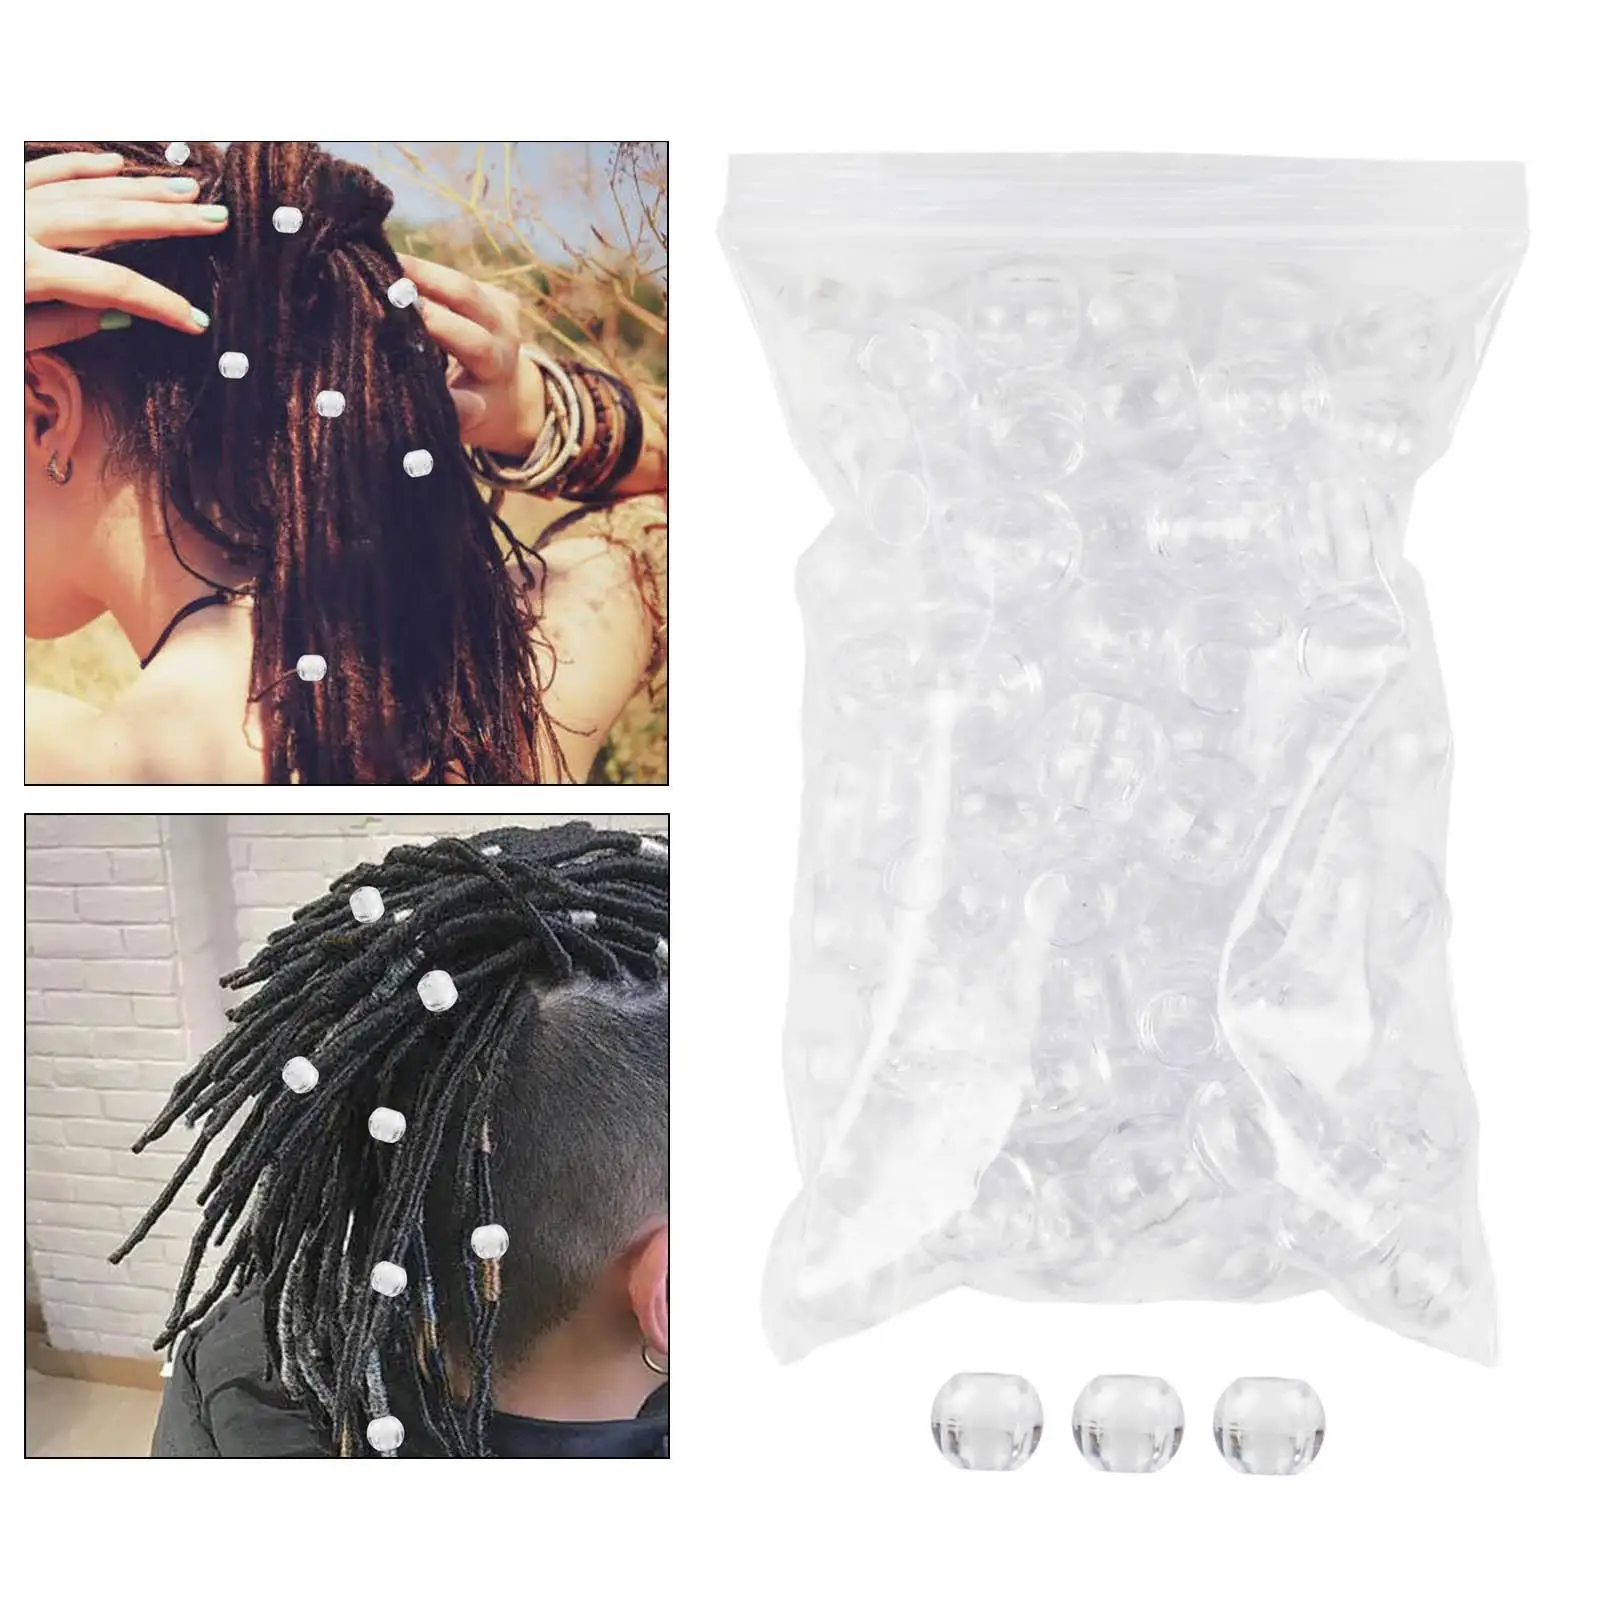 100x Dreadlock Beads 16mm Dia 8mm Hole Crafts Kit Hair Extension Beads for Dreadlock Wig